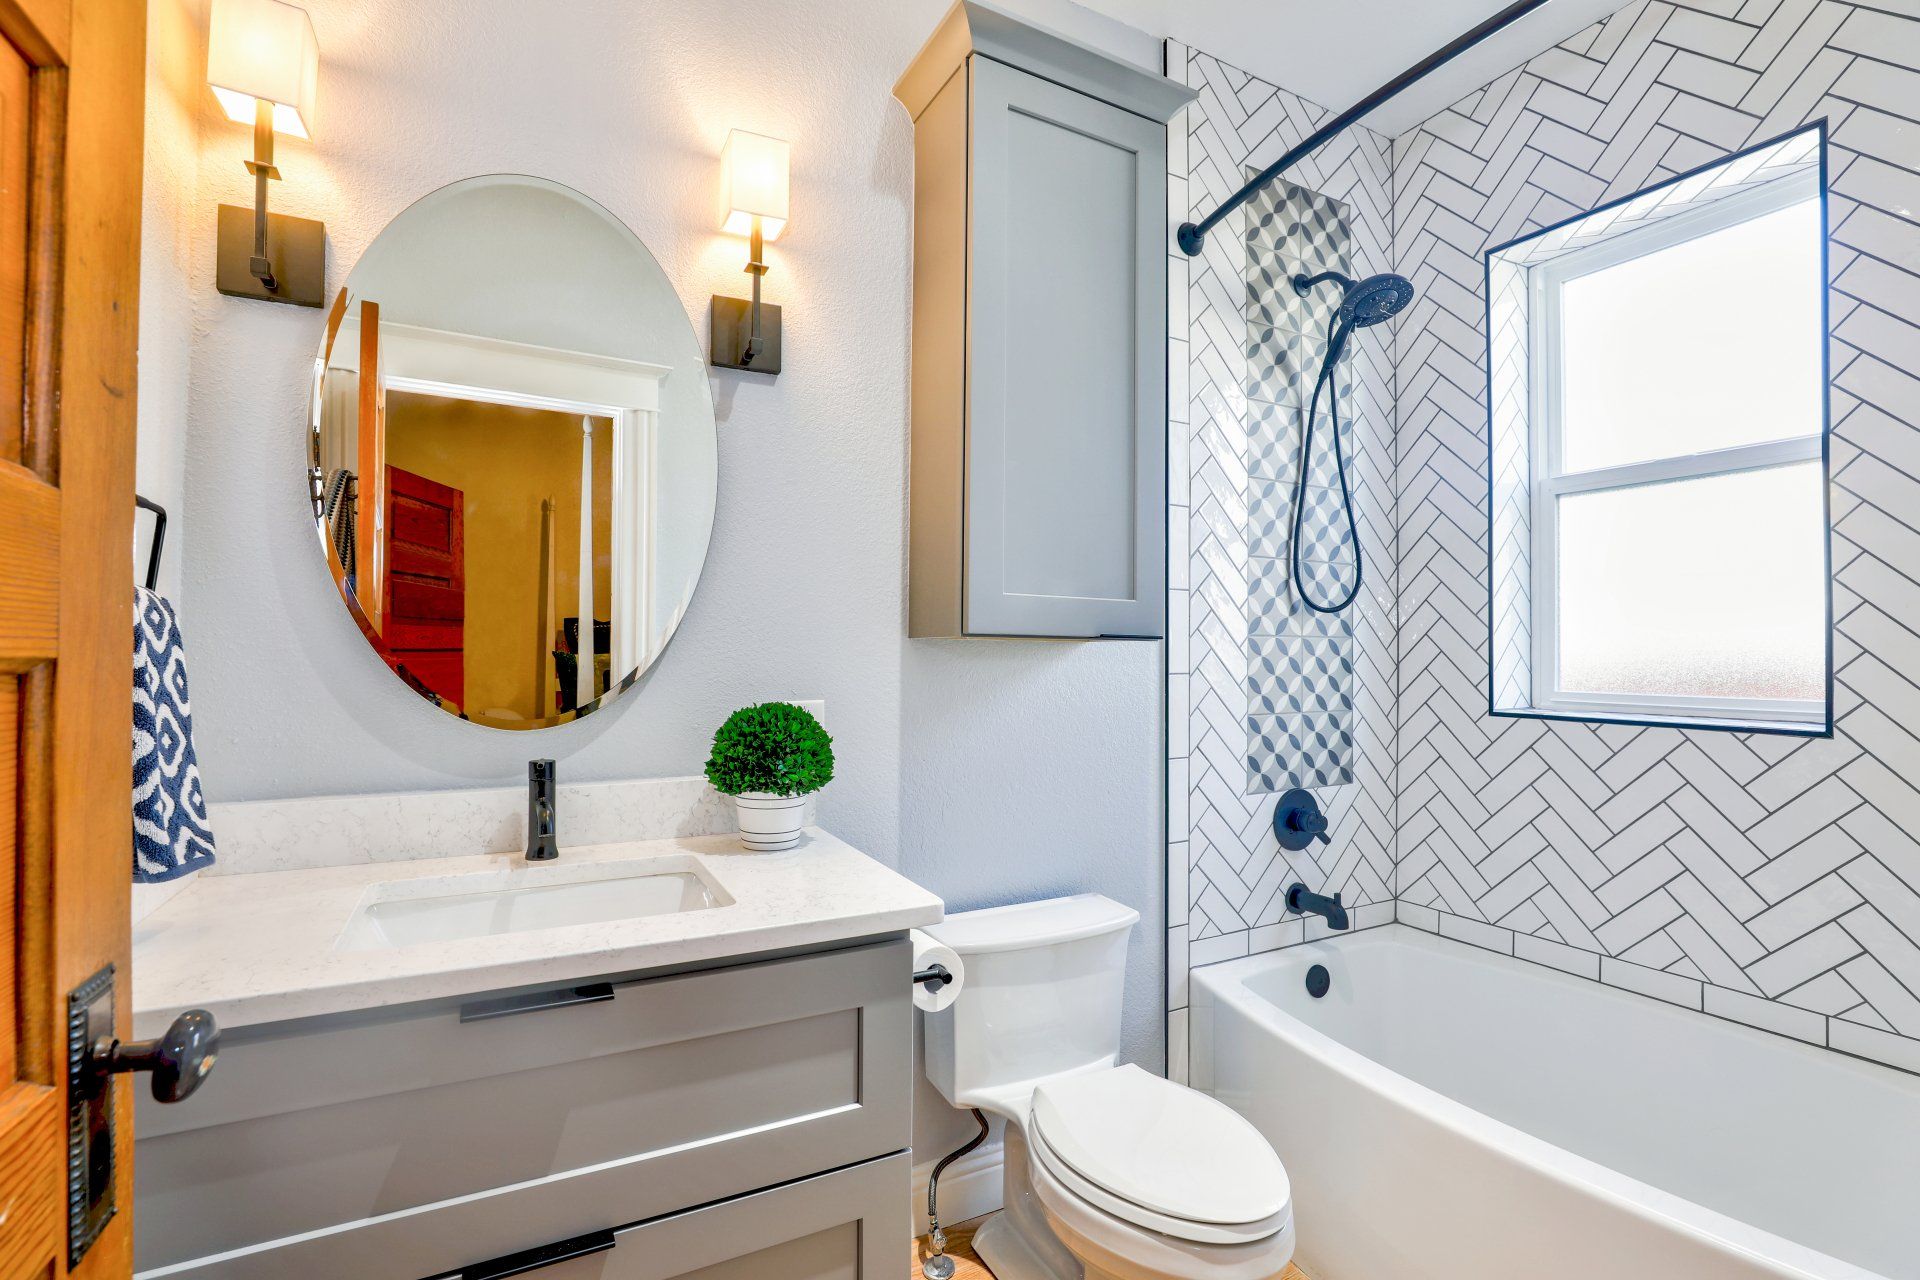 Preventing Water Damage in Bathrooms: Common Causes and Prevention